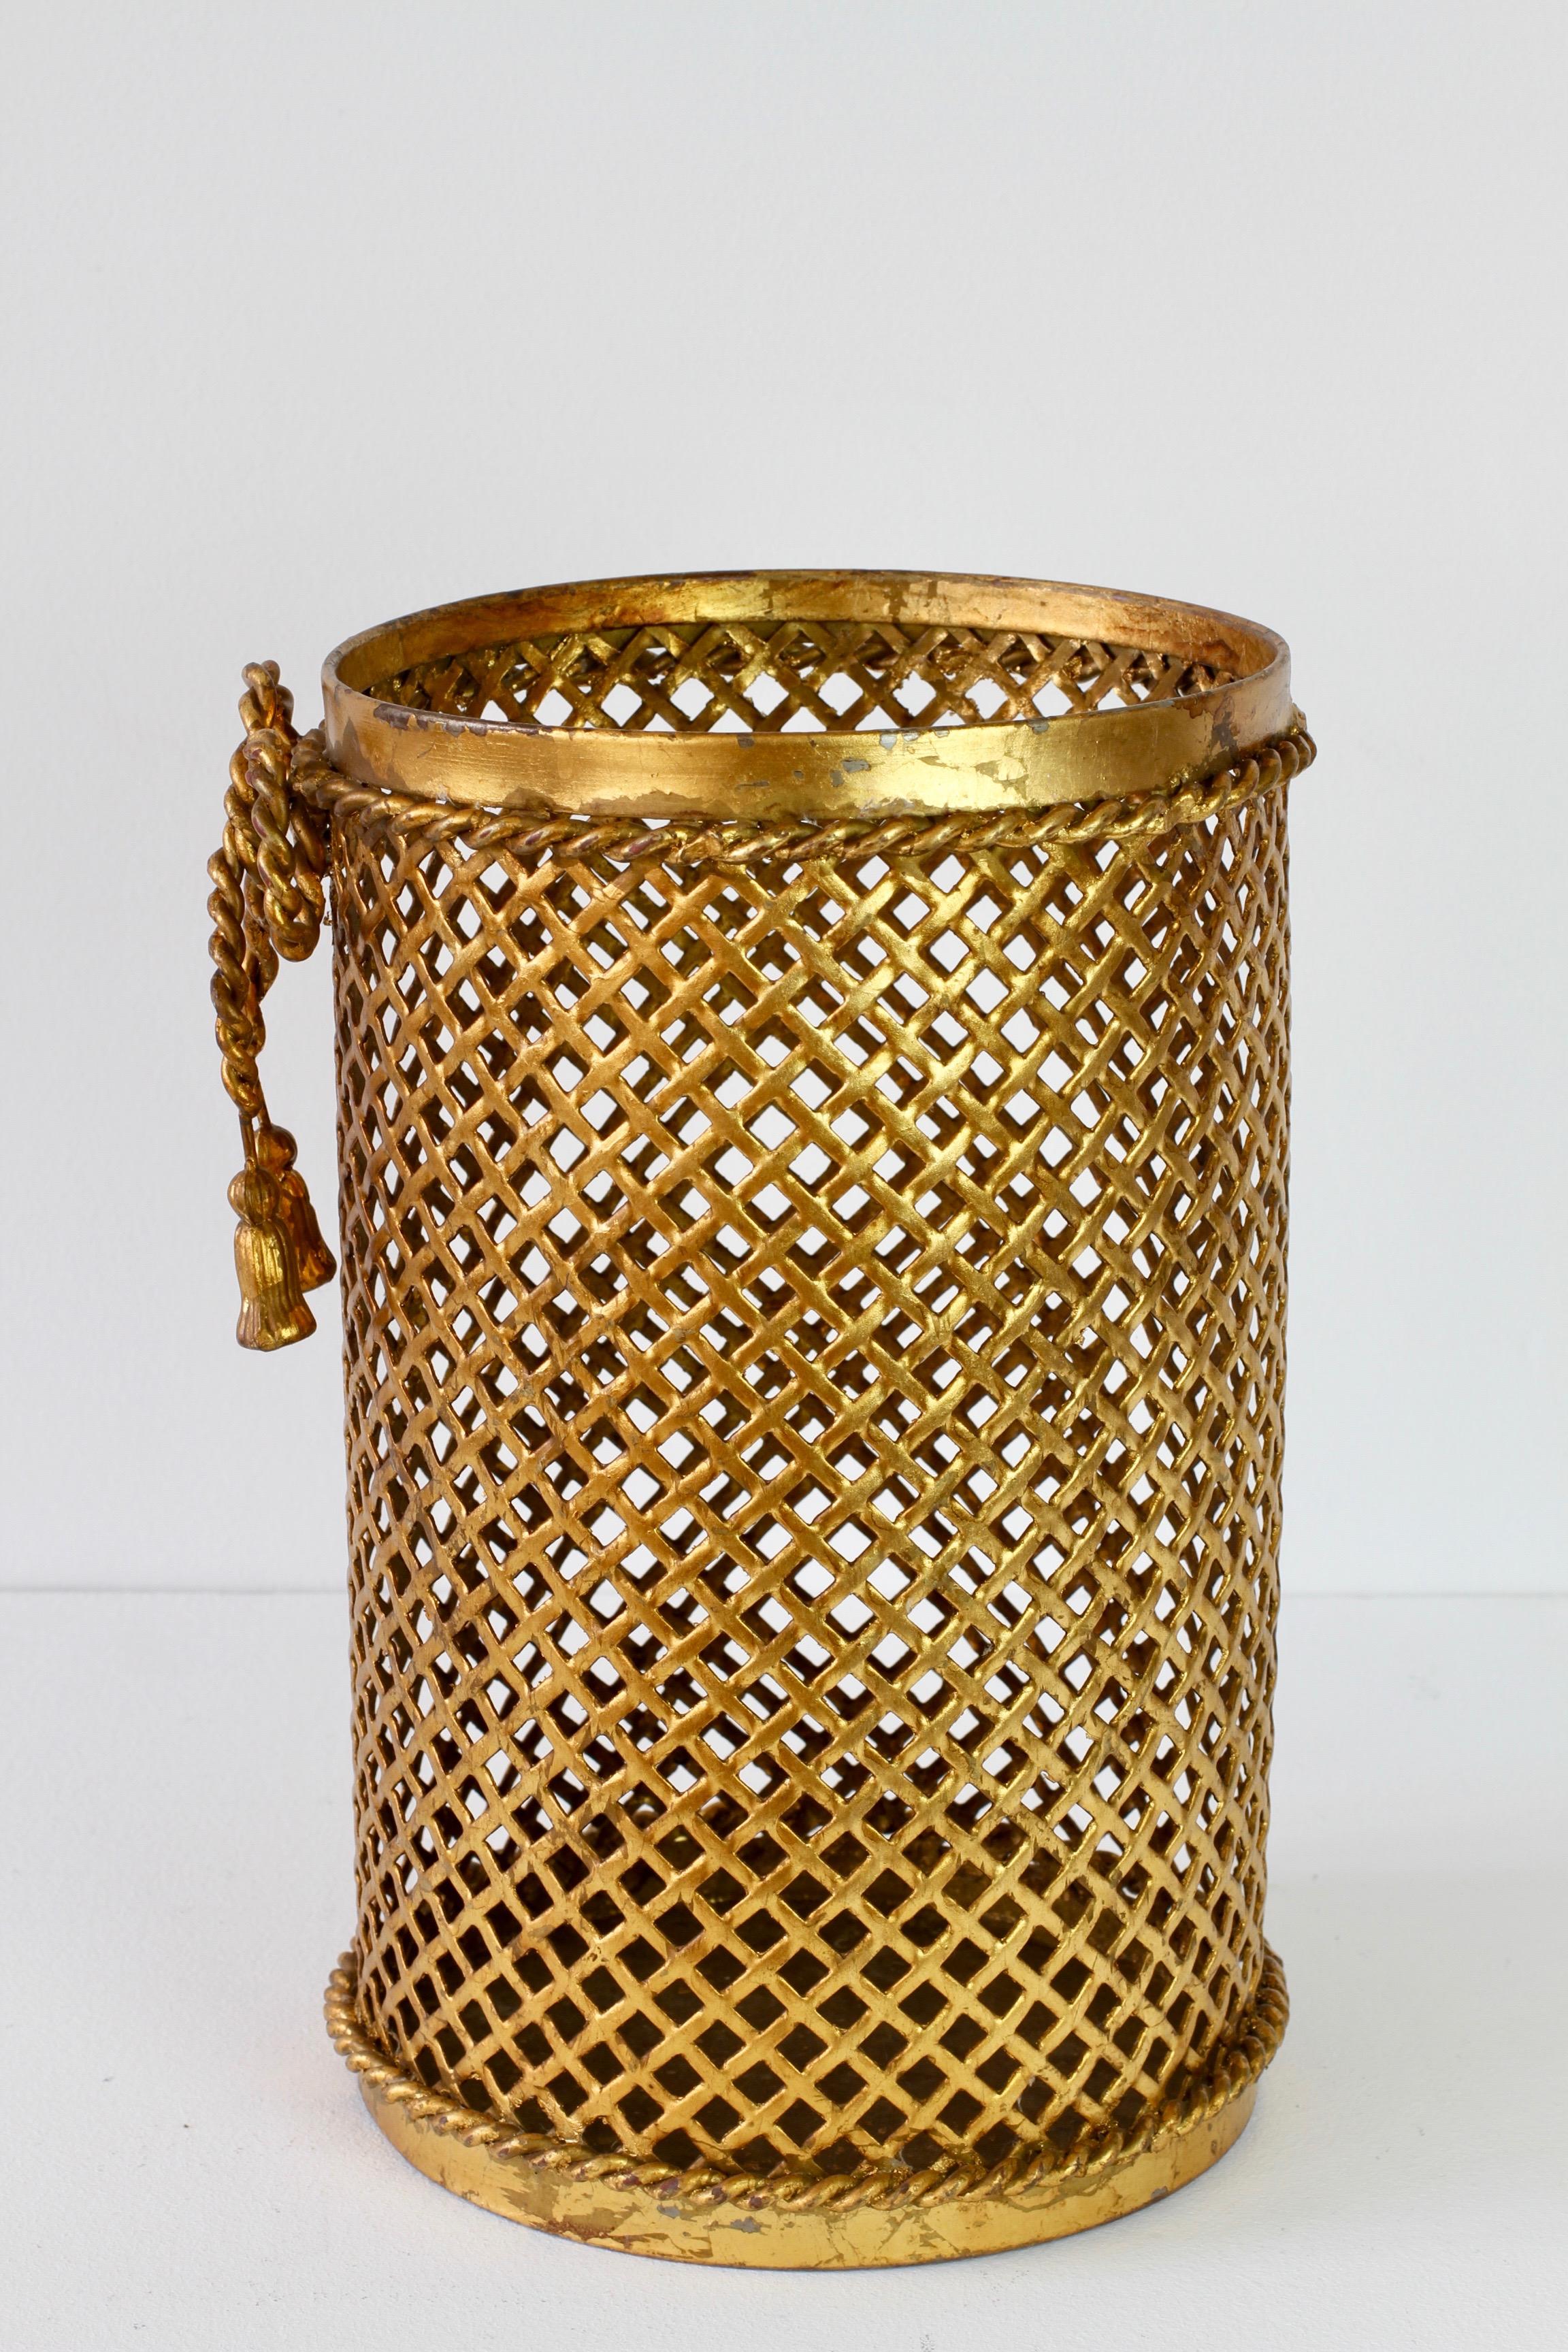 Wrought Iron Mid-Century 1950s Hollywood Regency Italian Gold Gilded Waste Paper Basket